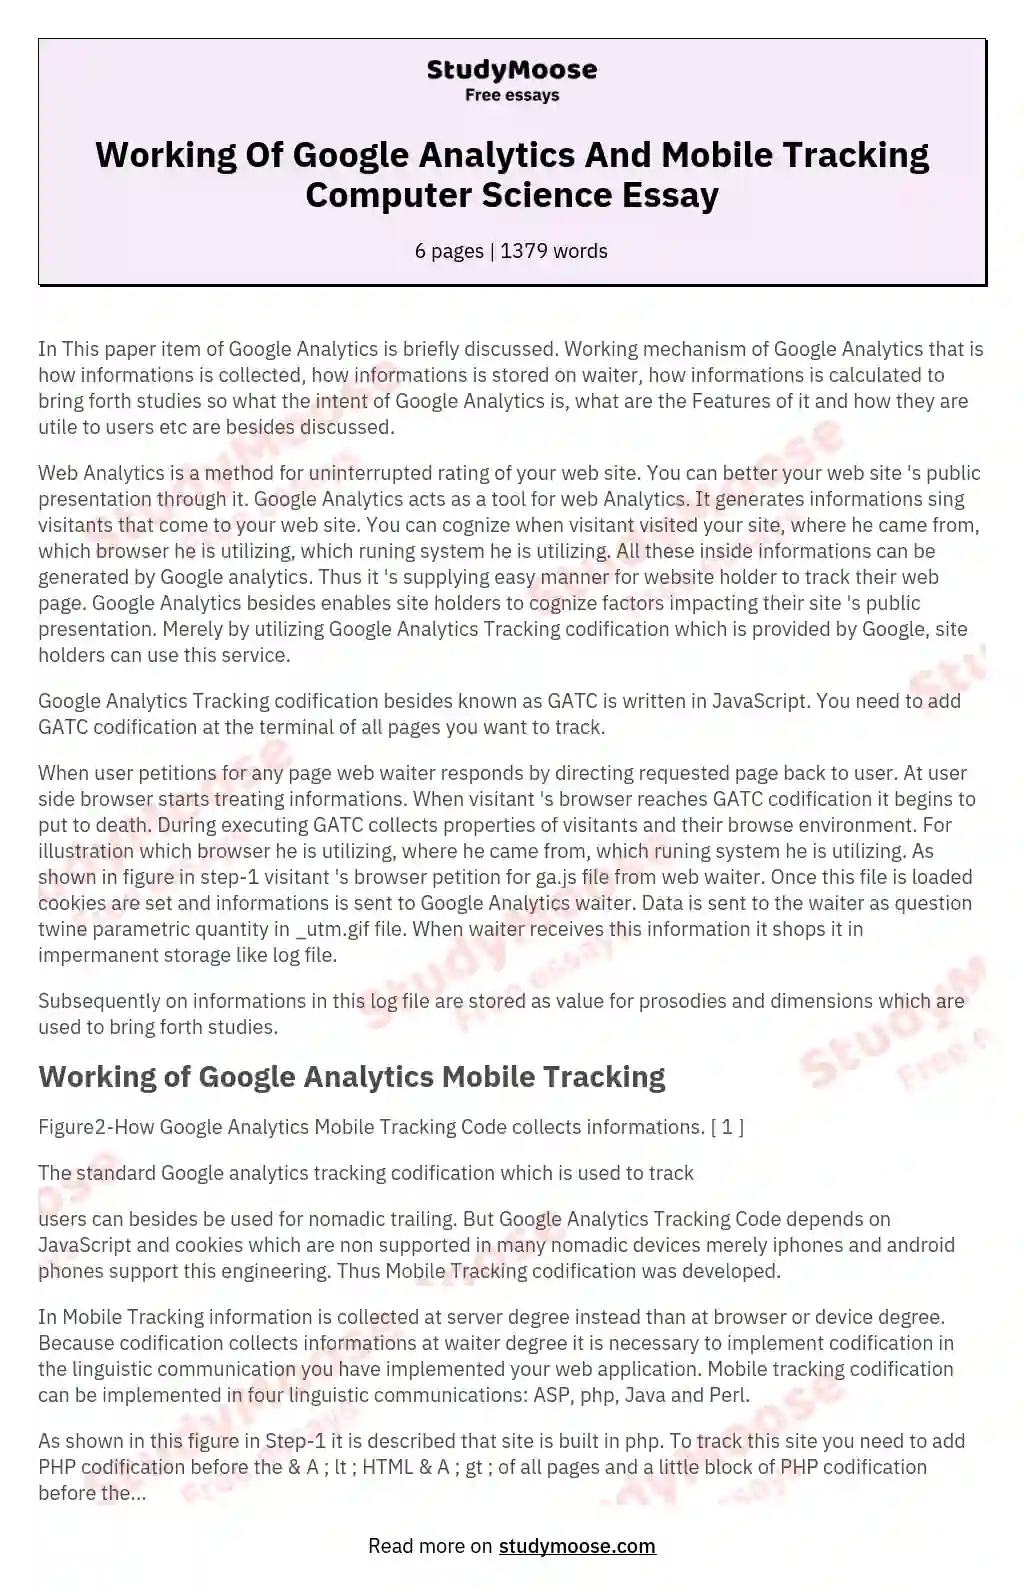 Working Of Google Analytics And Mobile Tracking Computer Science Essay